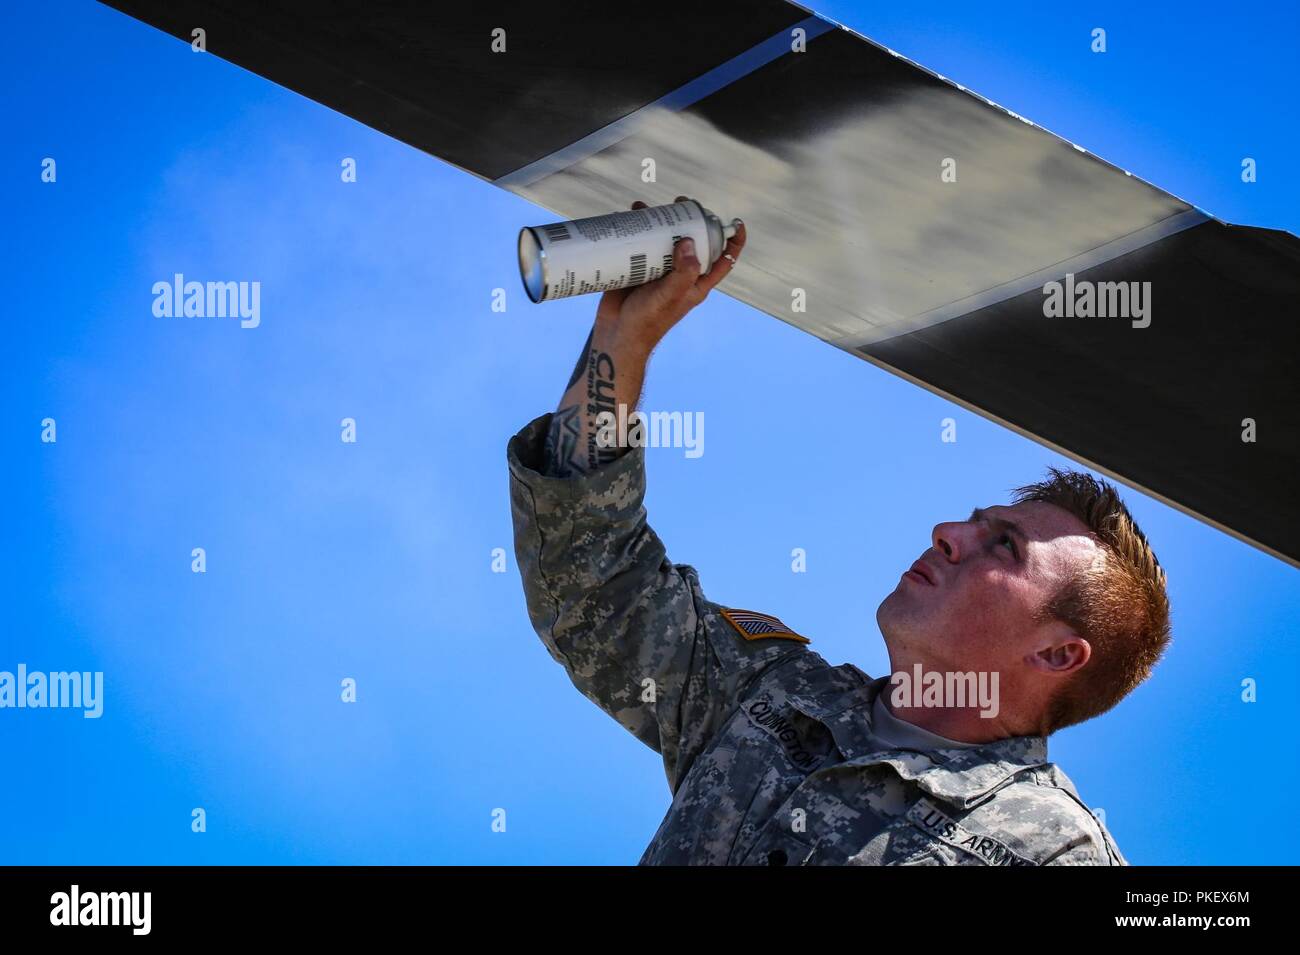 Spc. Christopher Cuddington, Charlie Company, 1st Battalion, 140th Aviation Regiment, sprays a white section on the blade of a UH-60 Black Hawk helicopter in preparation for wild fire support, July 31, 2018. The painted section will create a white disc so that the helicopter will be highly visible in the smoke and haze given off from forest fires. Stock Photo